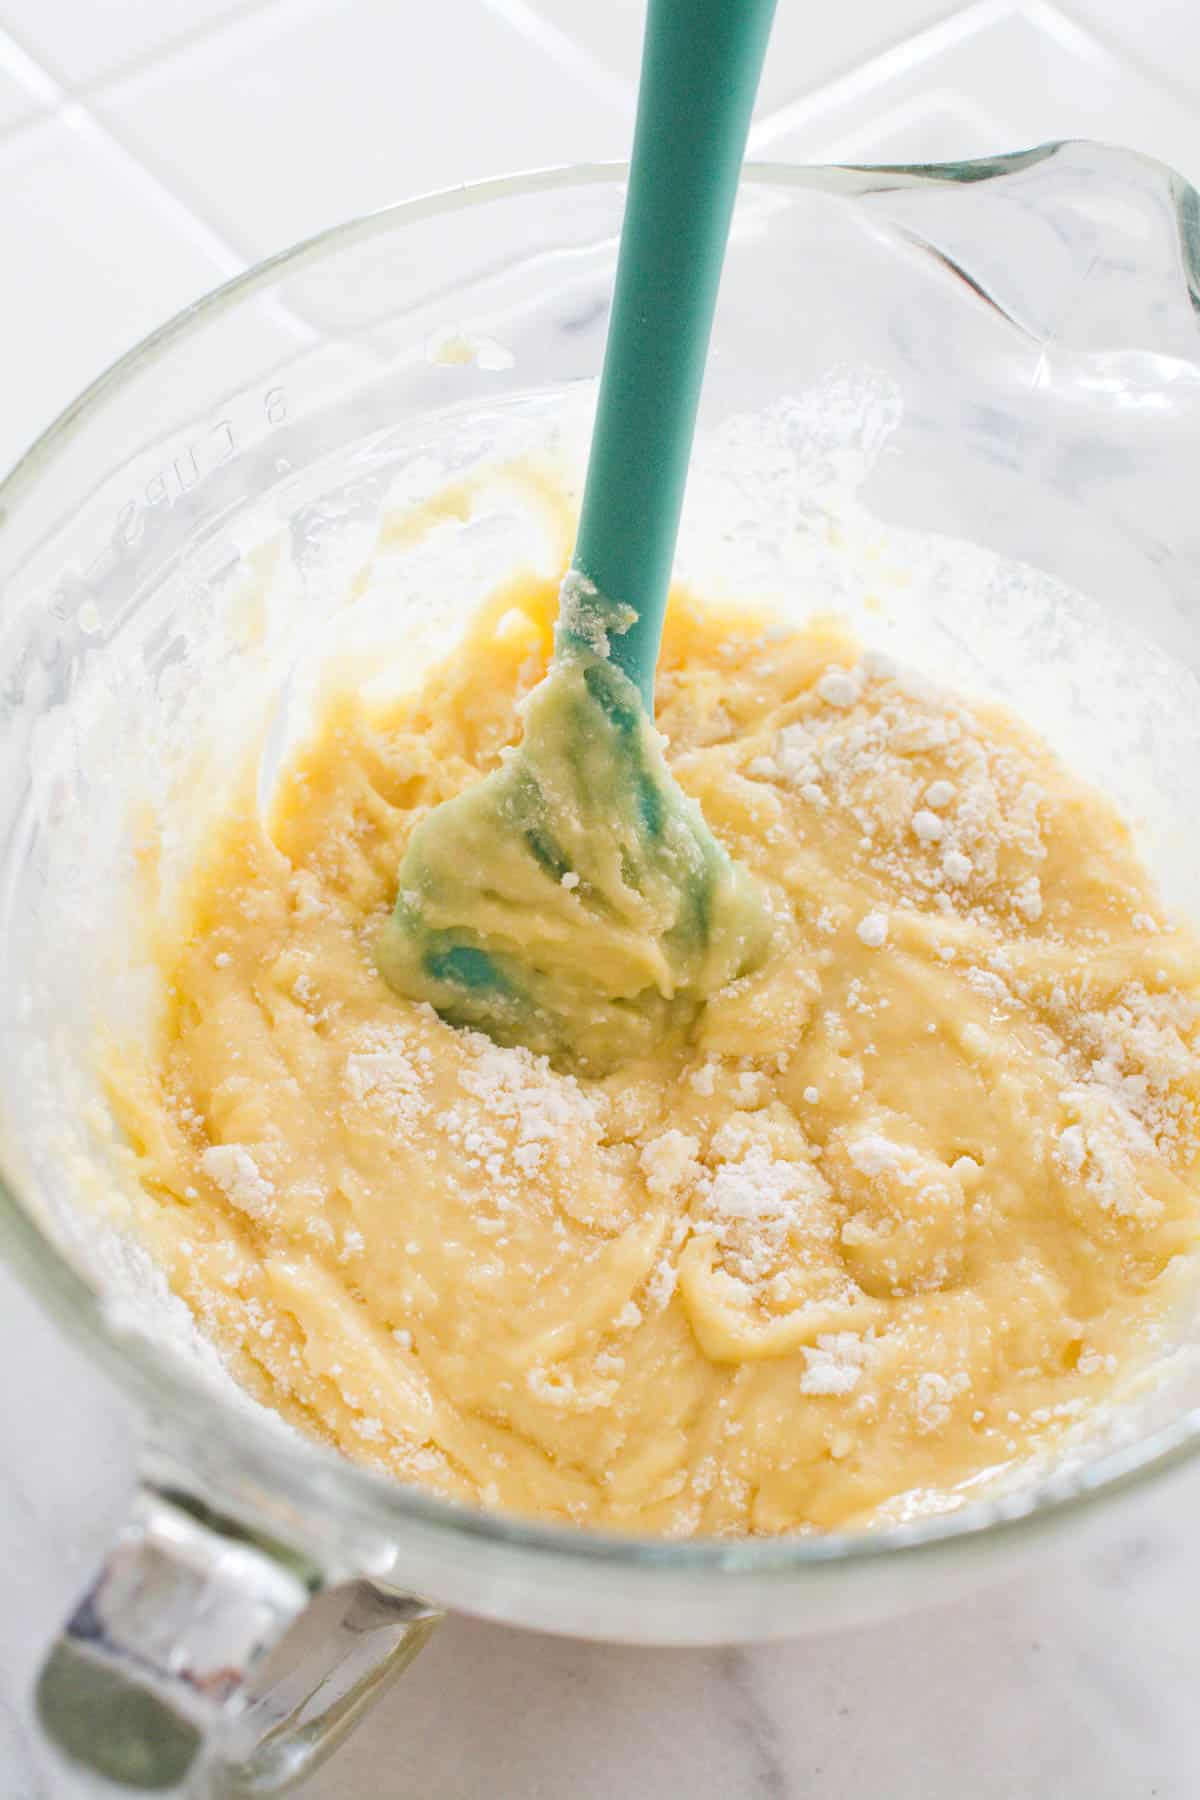 A cake batter being mixed by a spatula in a glass mixing bowl.